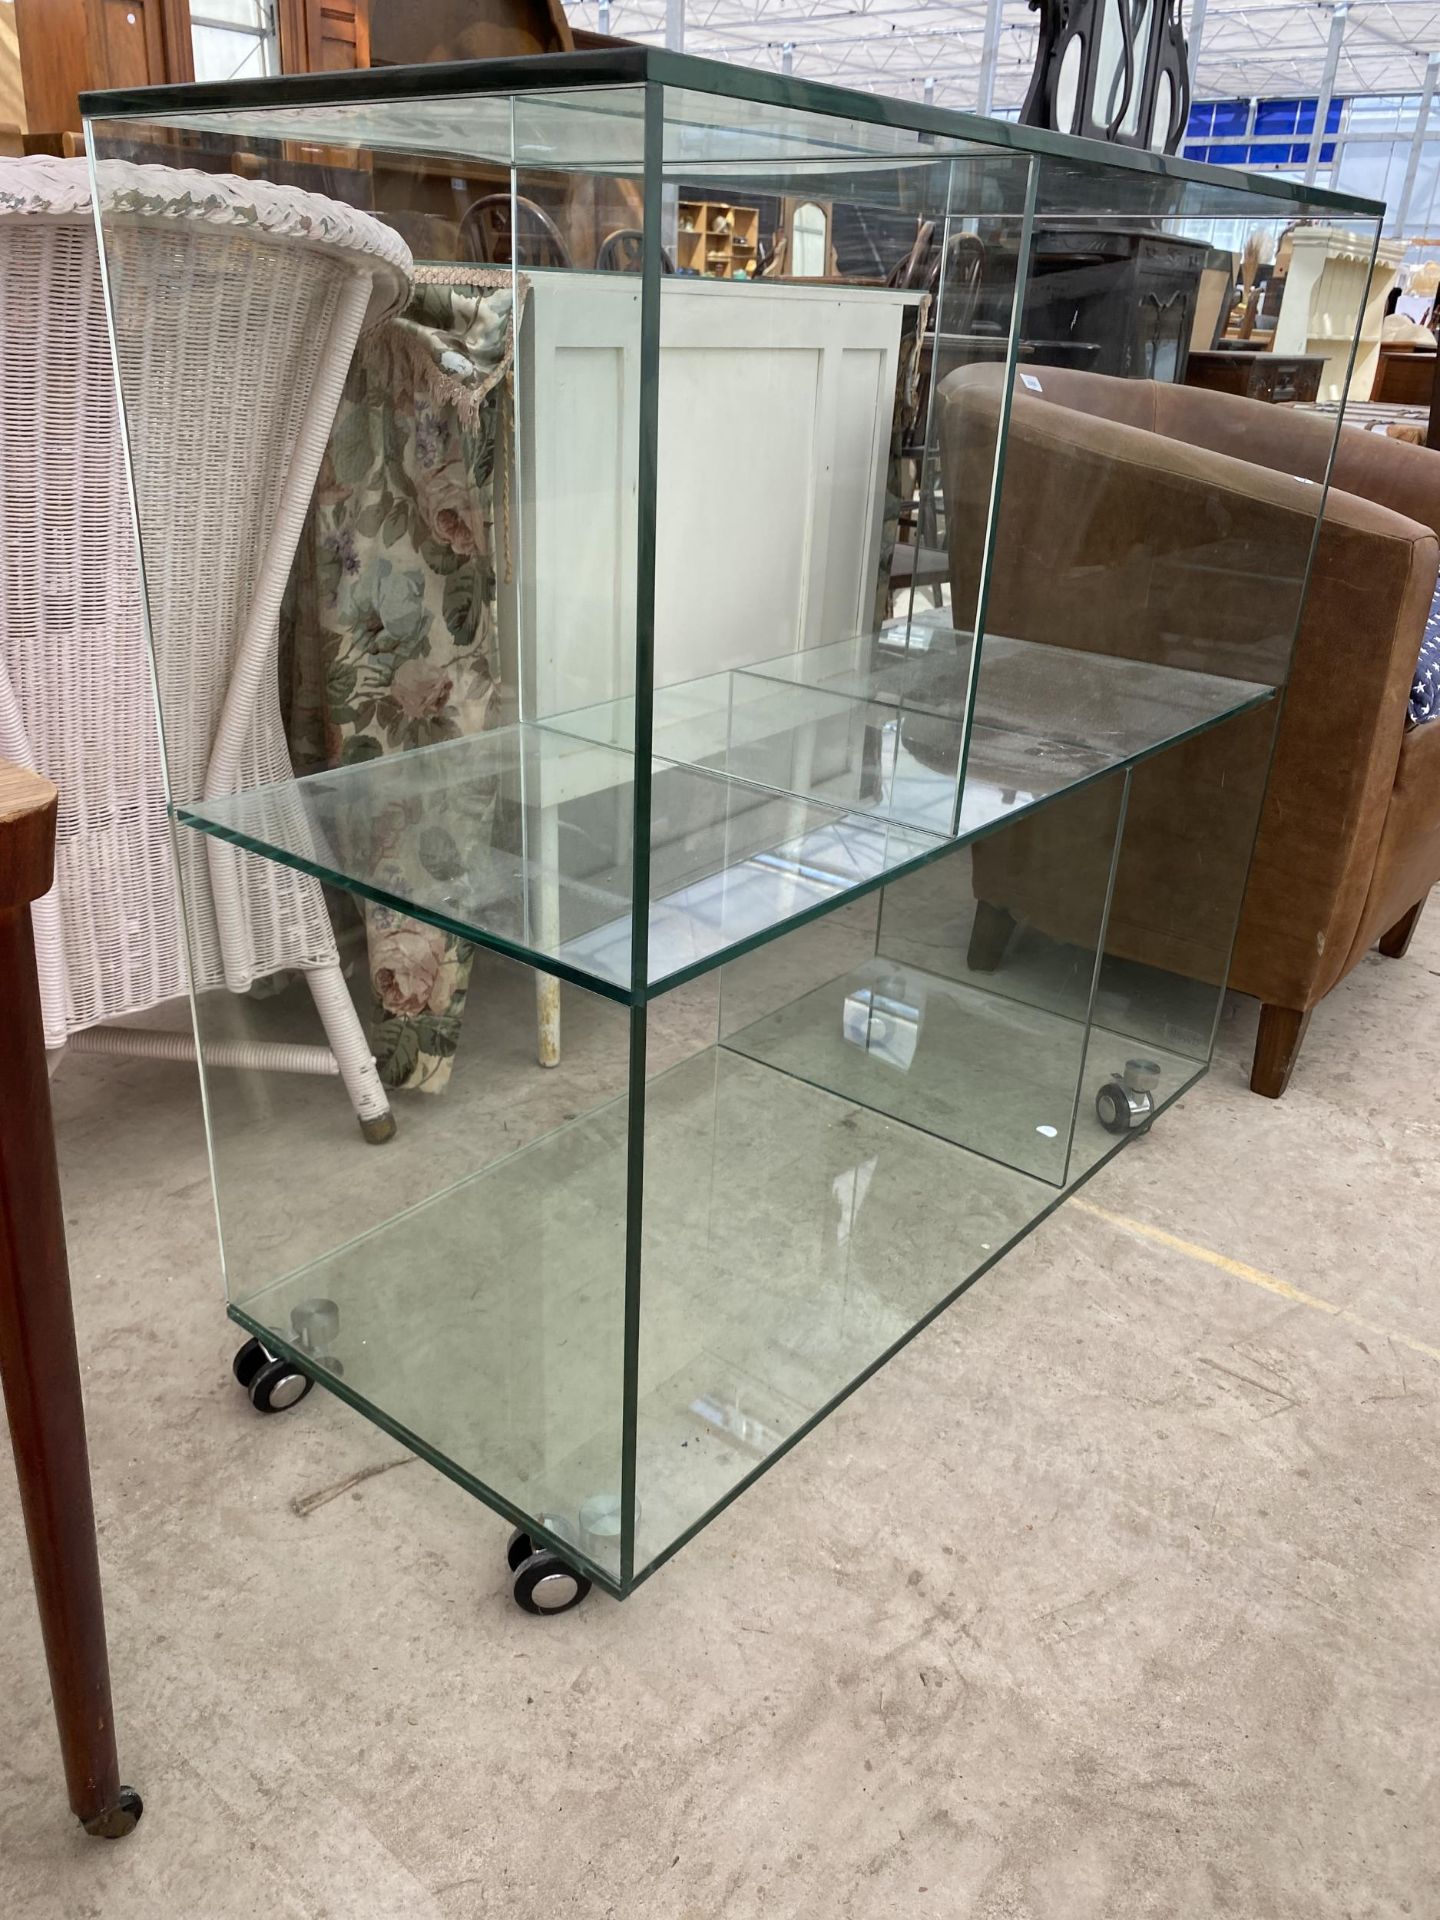 A MODERN GLASS FOUR SECTION DISPLAY STAND ON CASTERS, 35.5X16" - Image 2 of 2